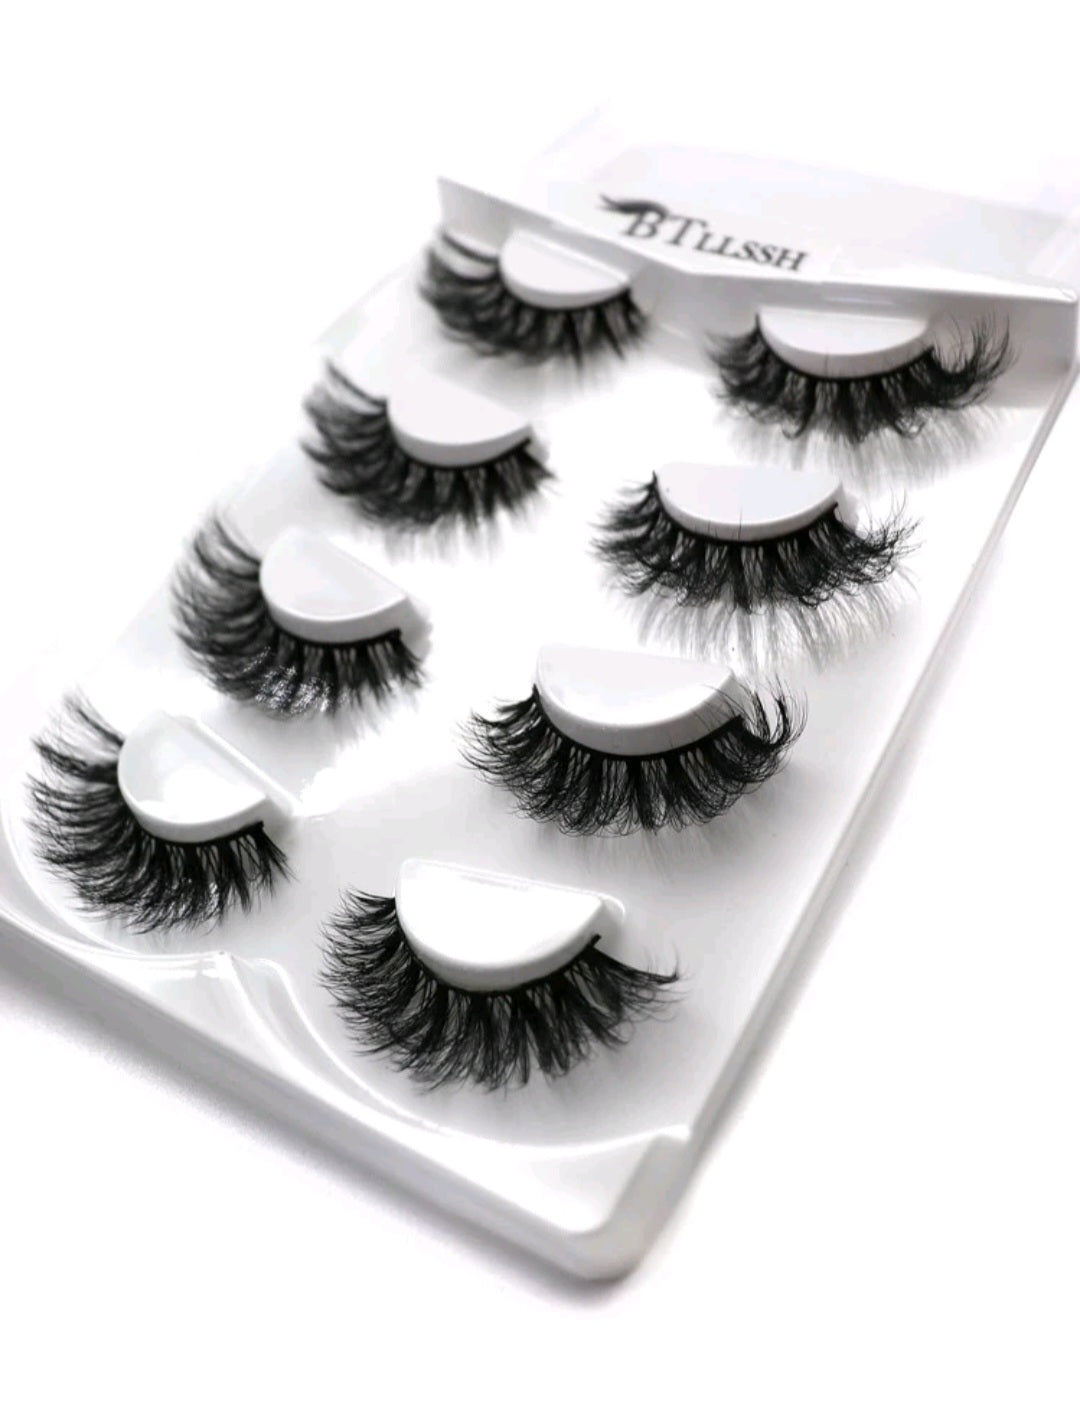 4 pairs Cateye False Eyelashes -4 paia di ciglia finte - SANDY'S MAKEUP AND ARTISTRY 